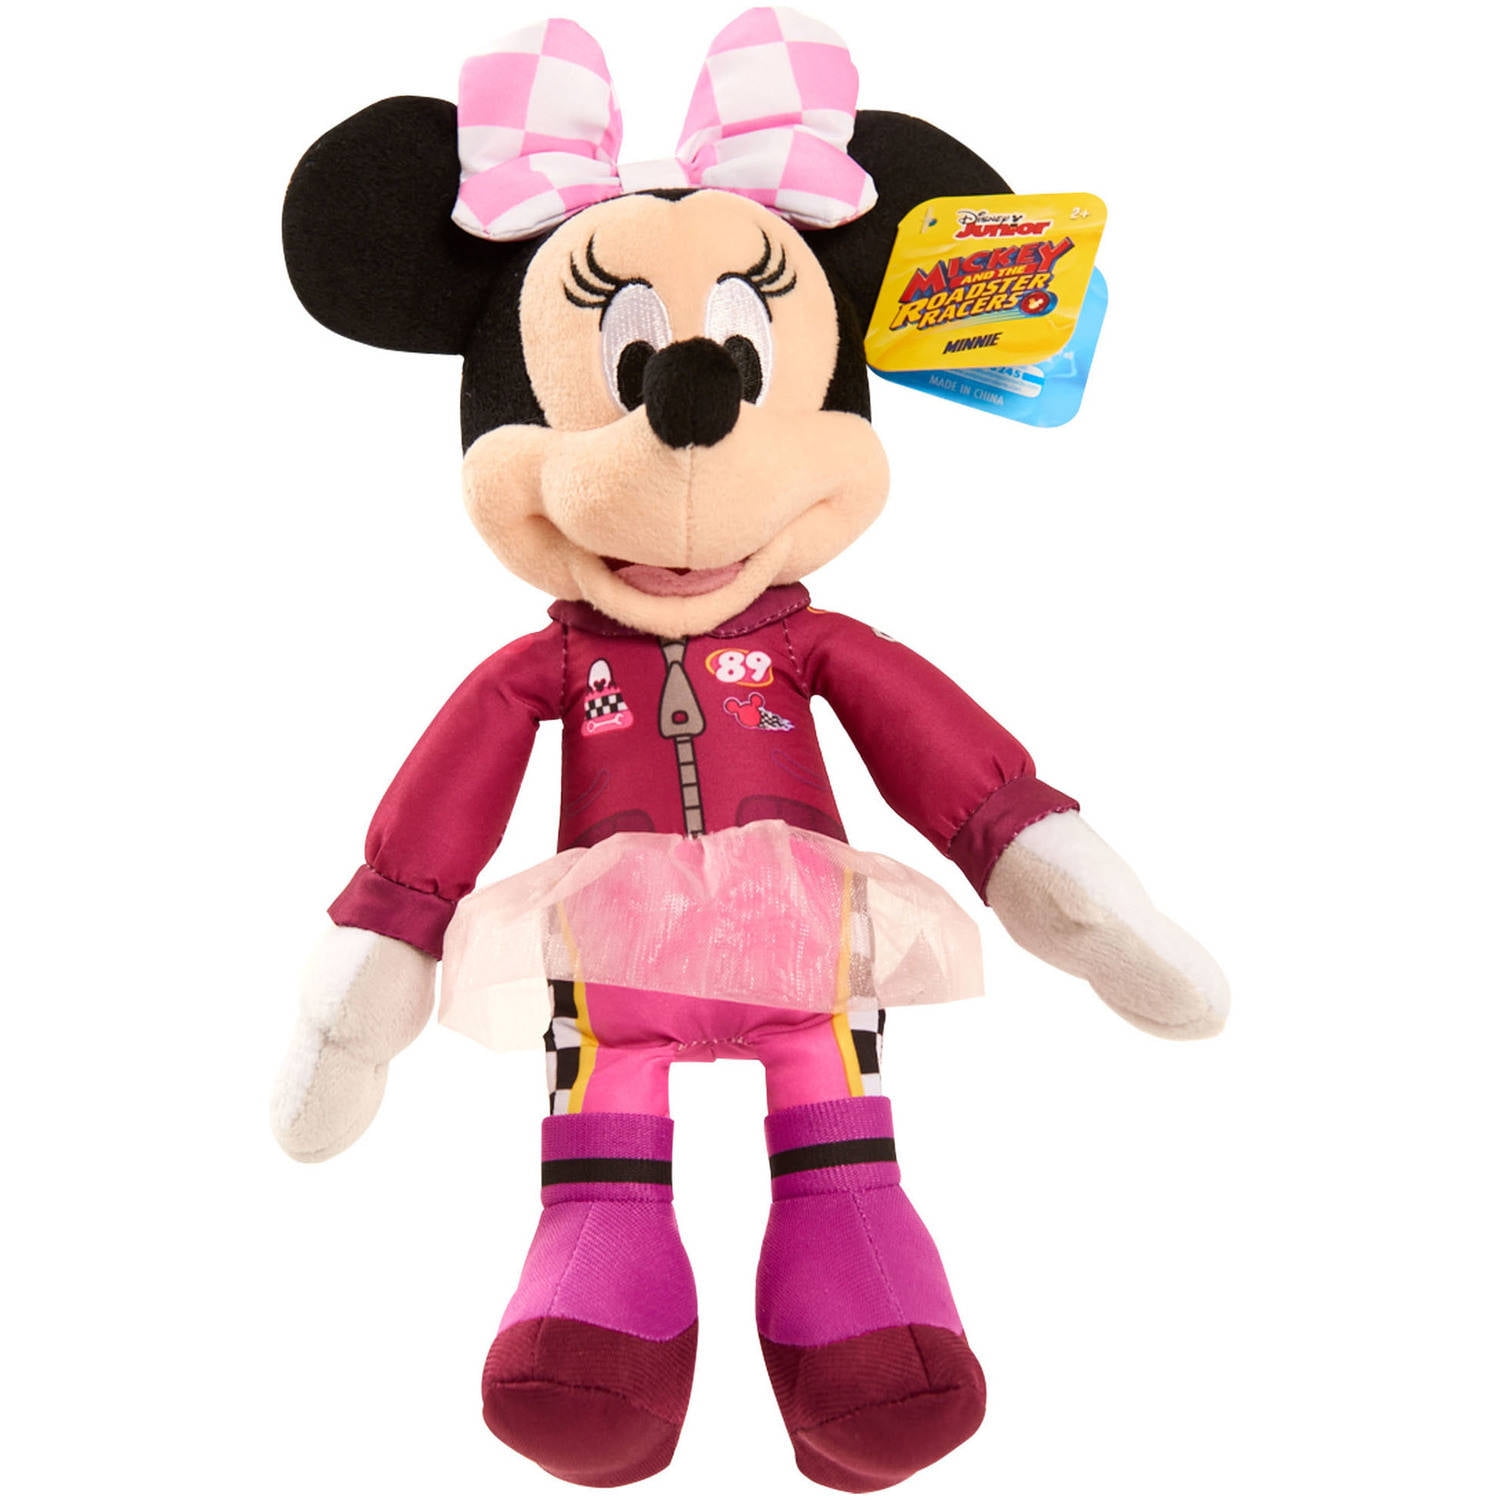 Disney Mickey and The Roadster Racers Racing Adventure Feature 16 Plush Toys for sale online 